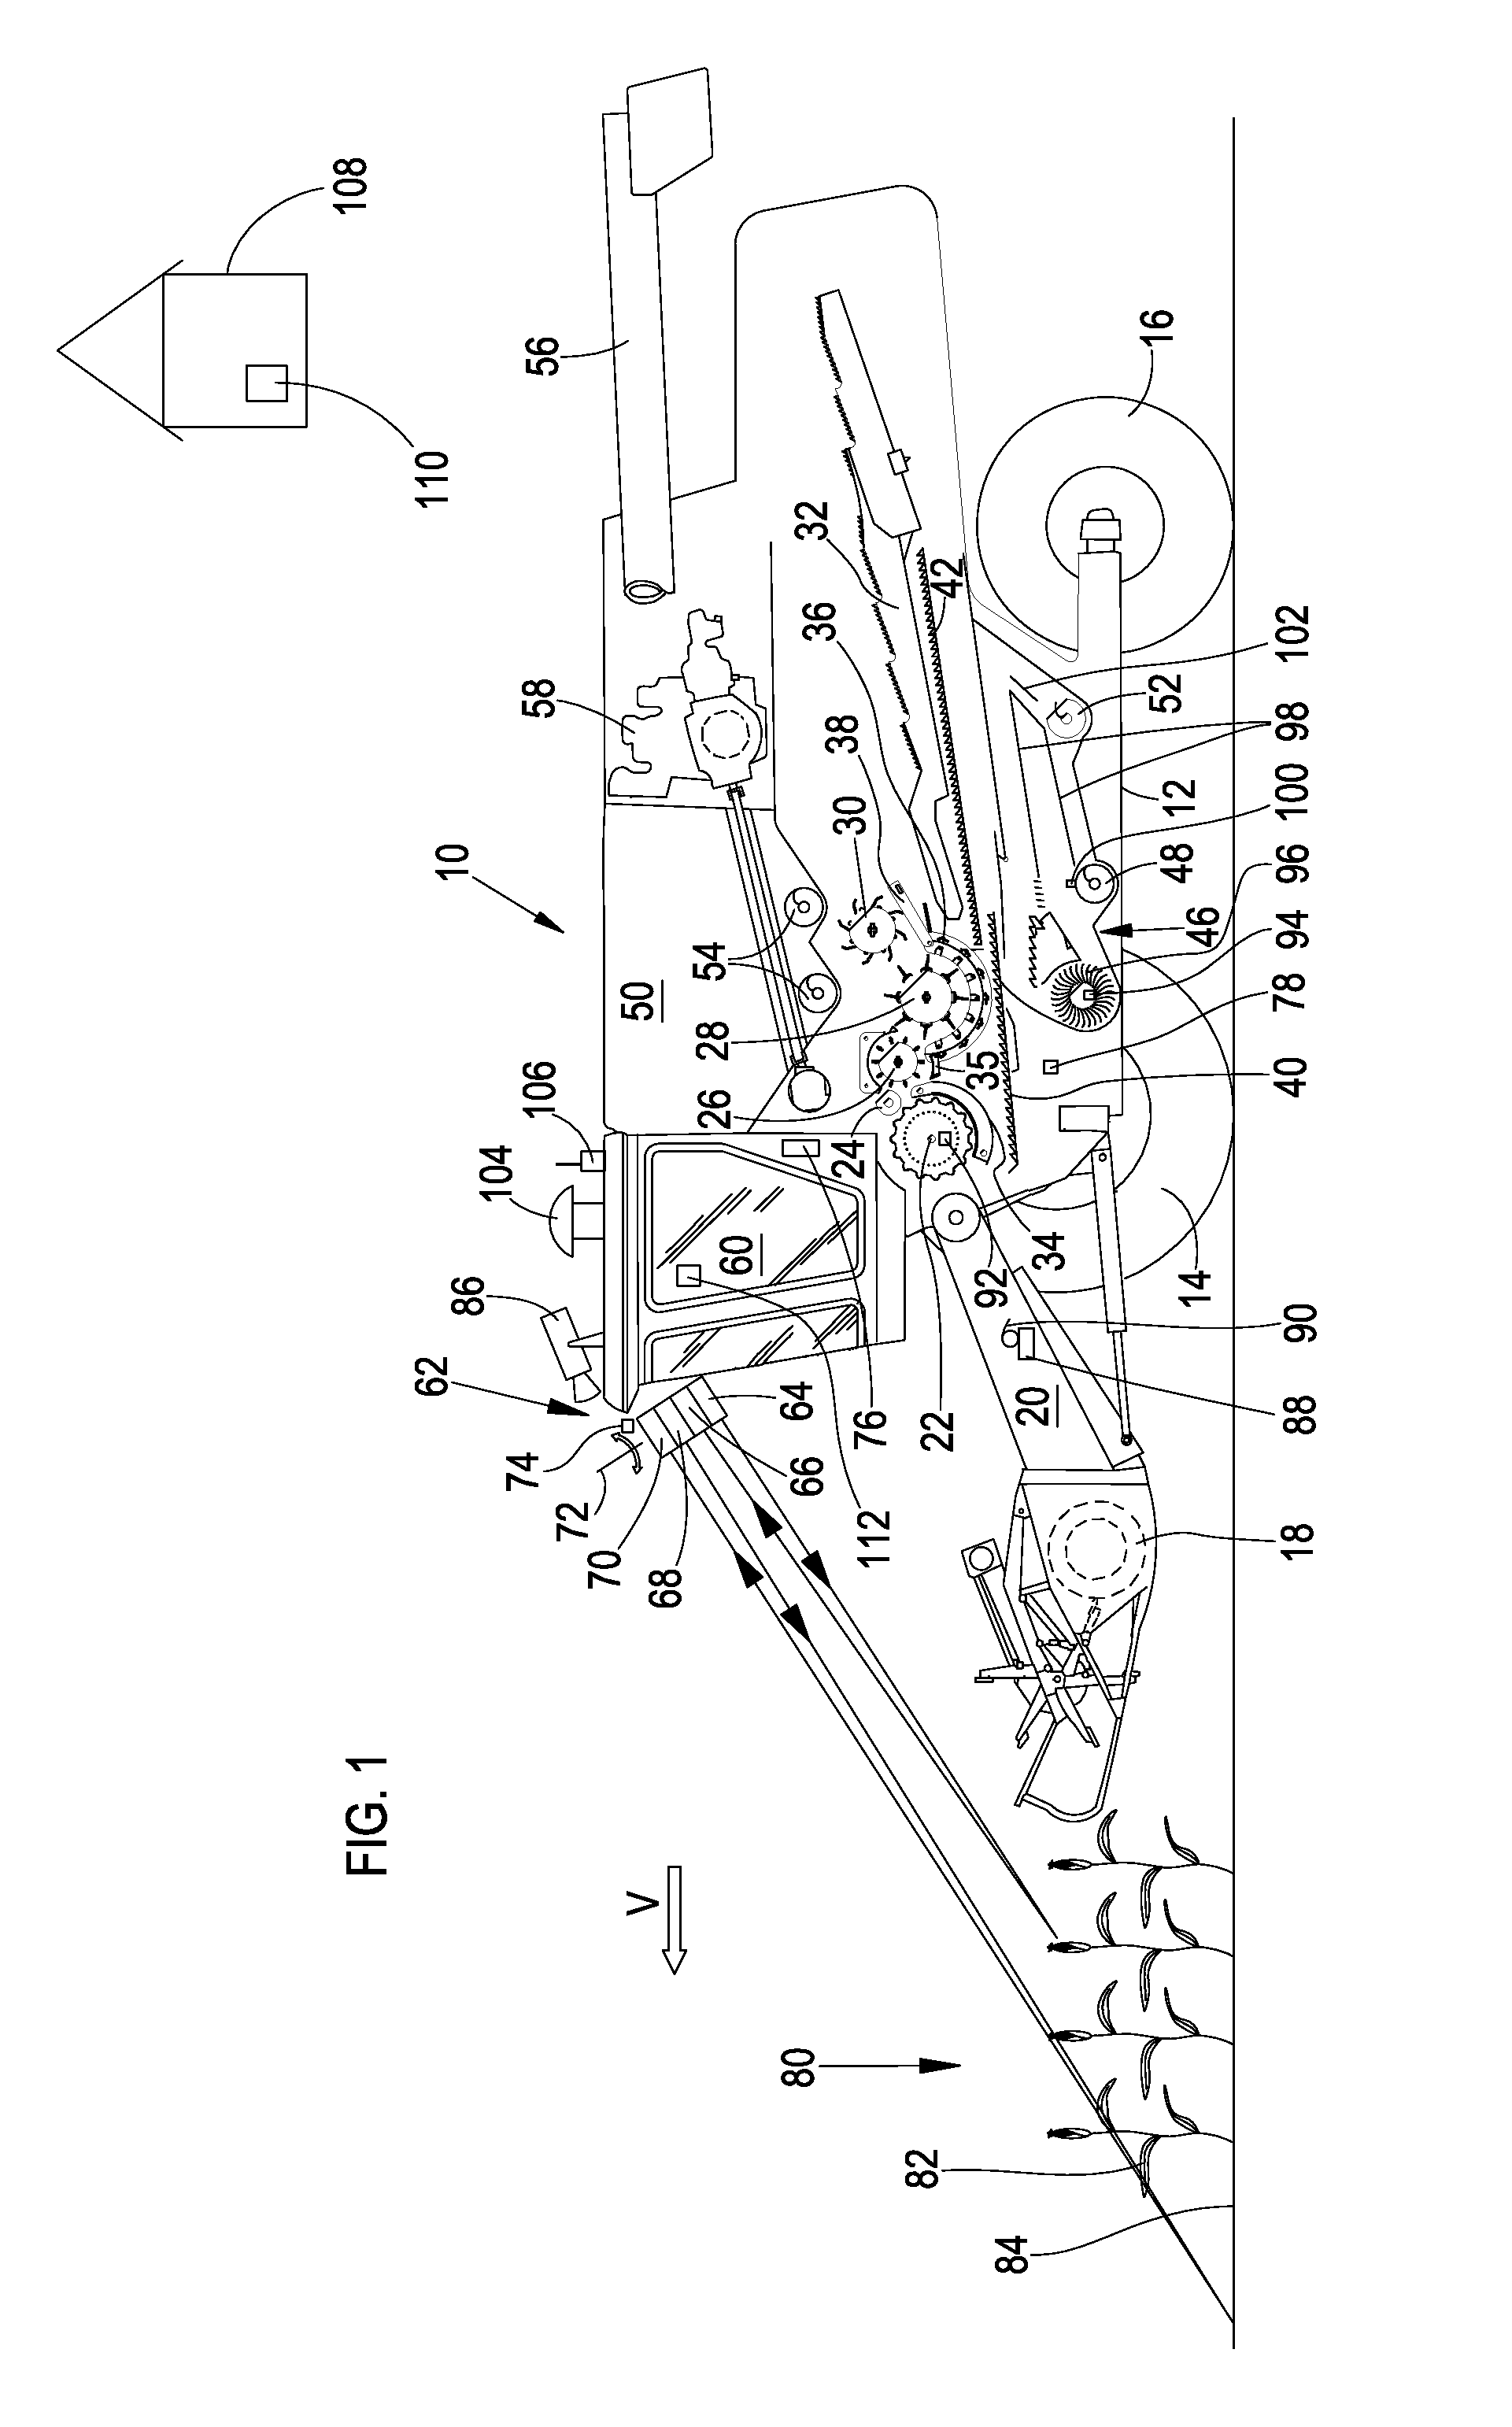 Arrangement and method for the automatic documentation of situations during field work